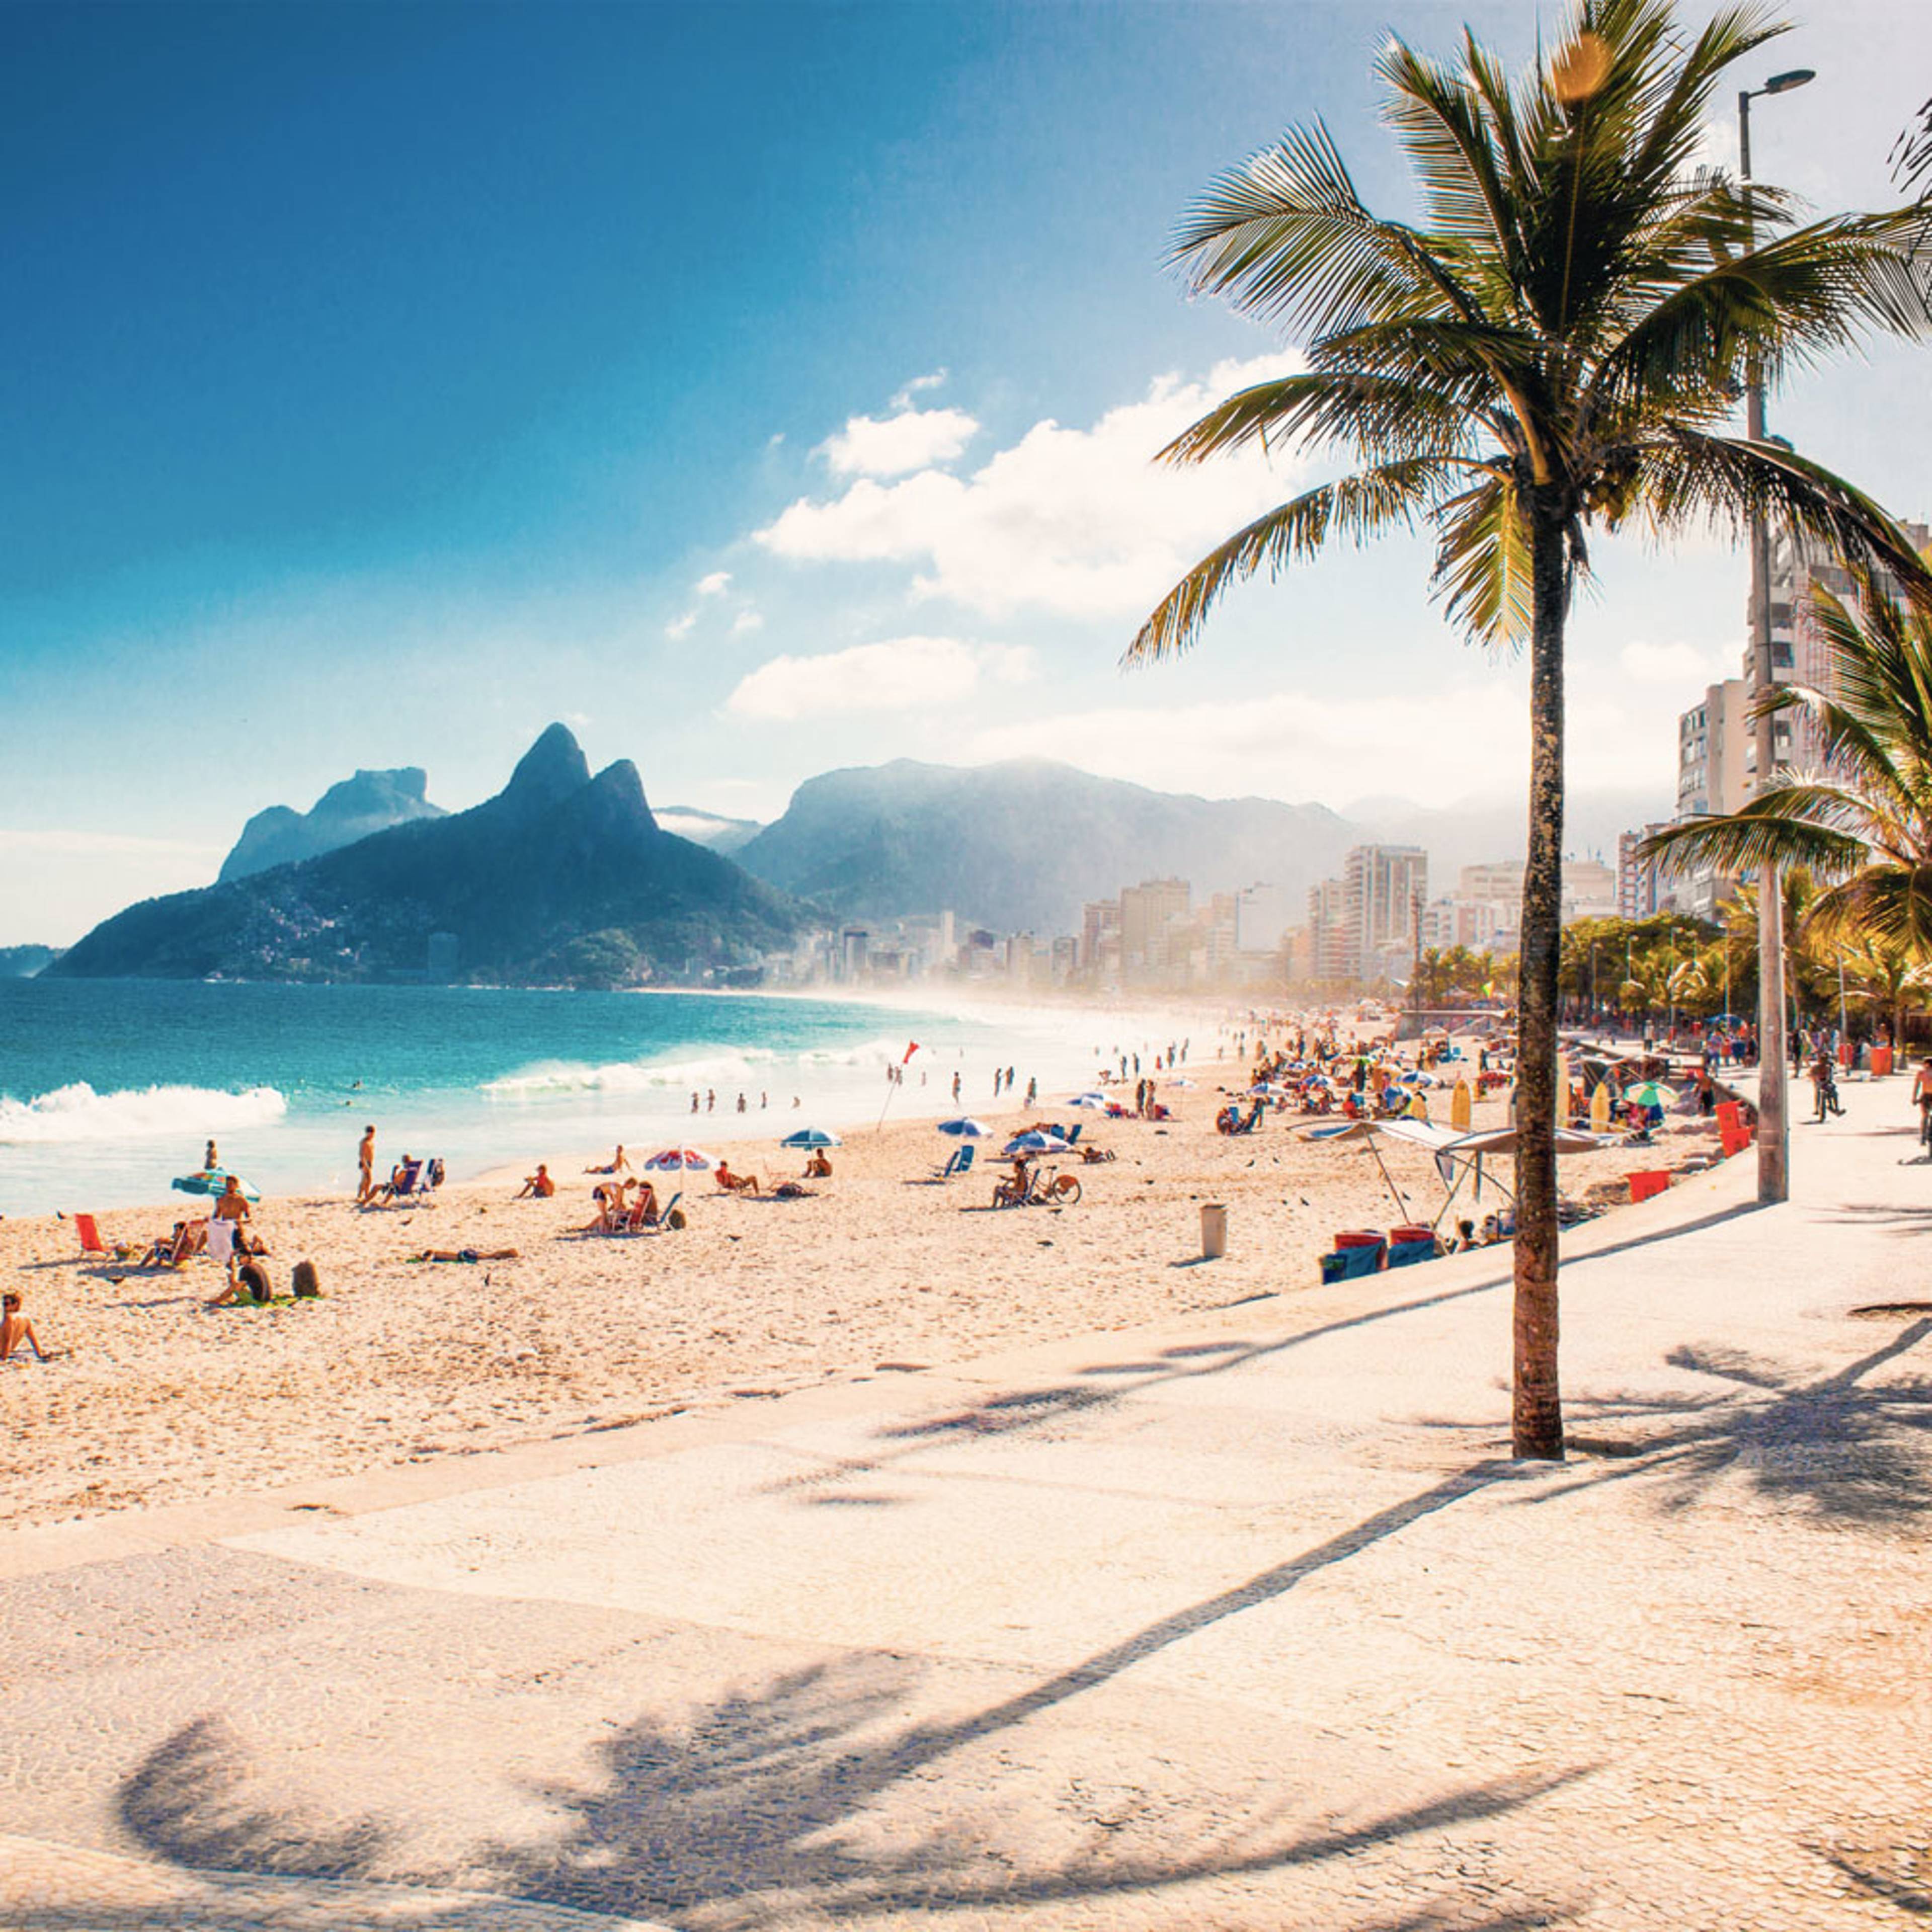 Design your perfect tour of Brazil's beaches with a local expert